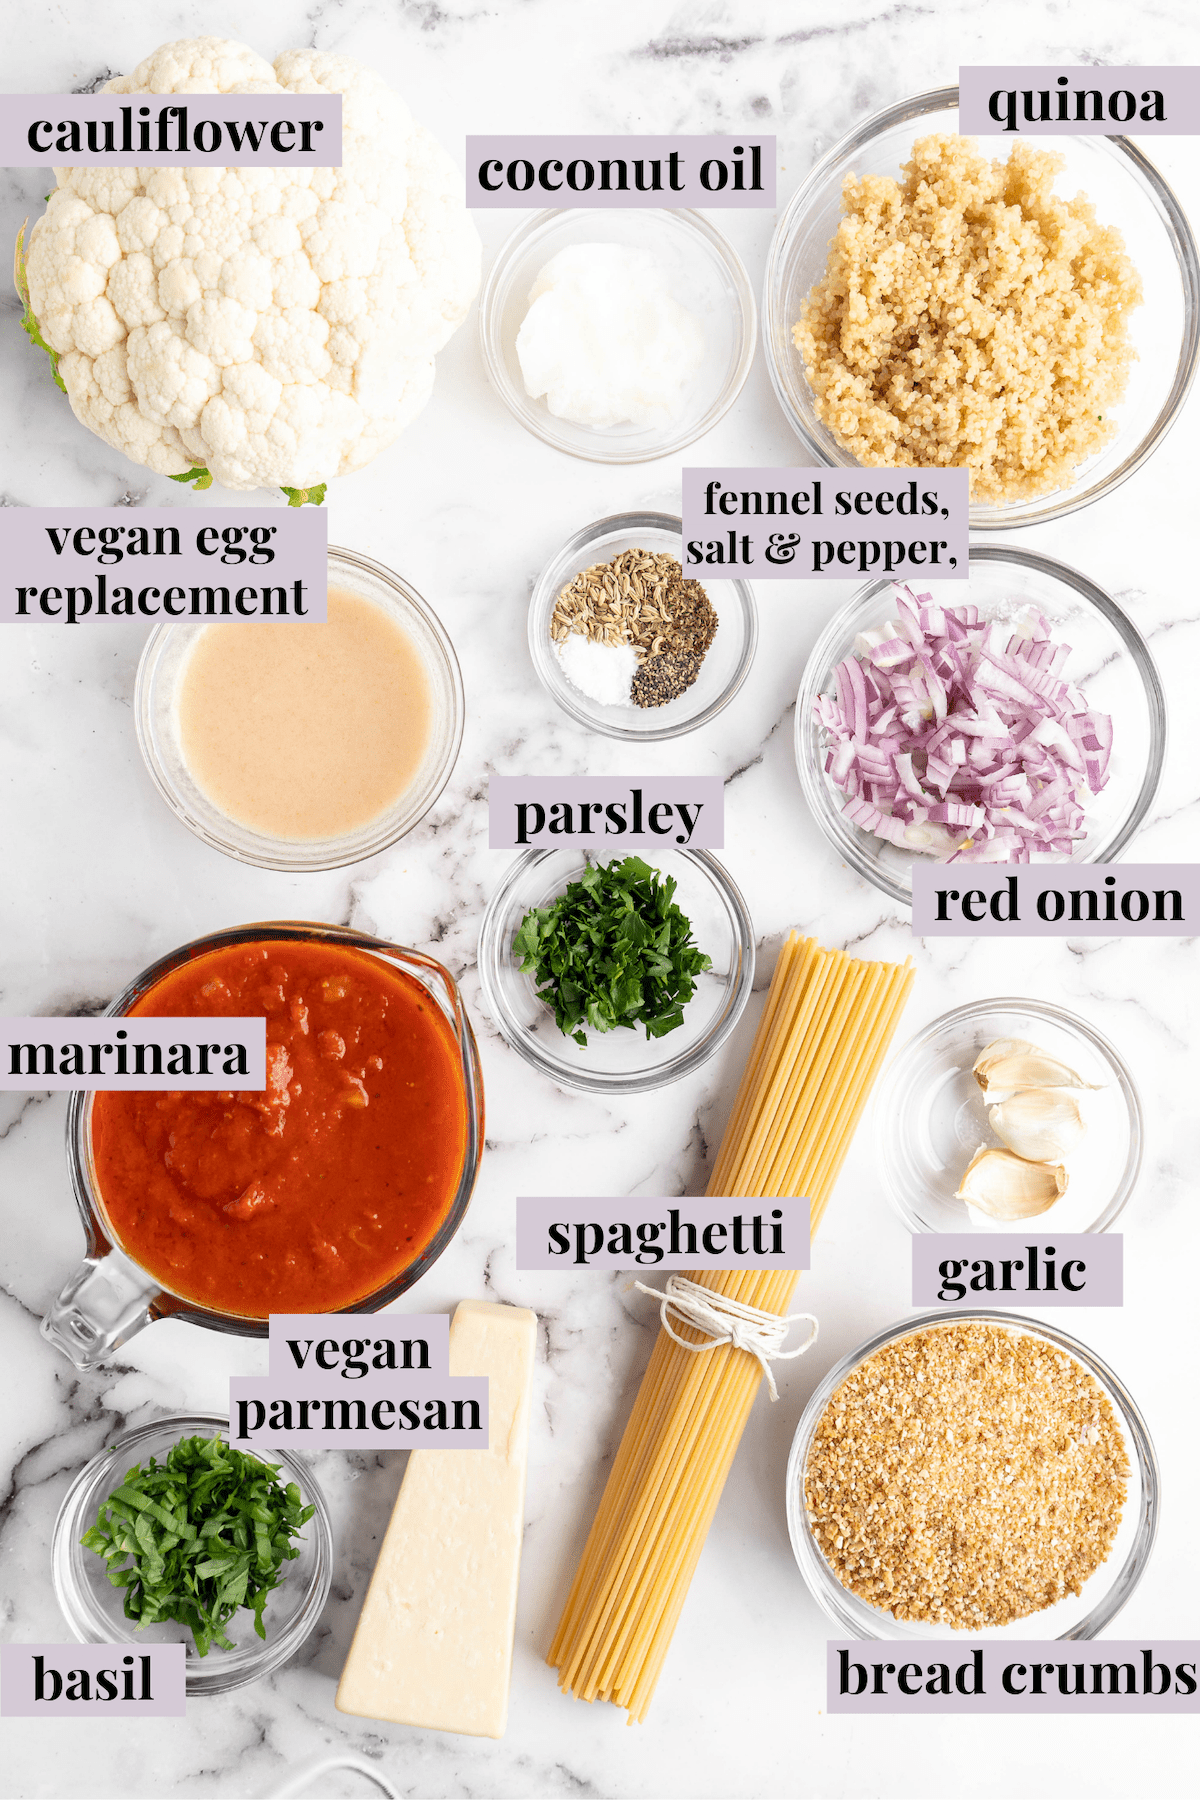 Overhead view of vegan spaghetti and meatball ingredients with labels